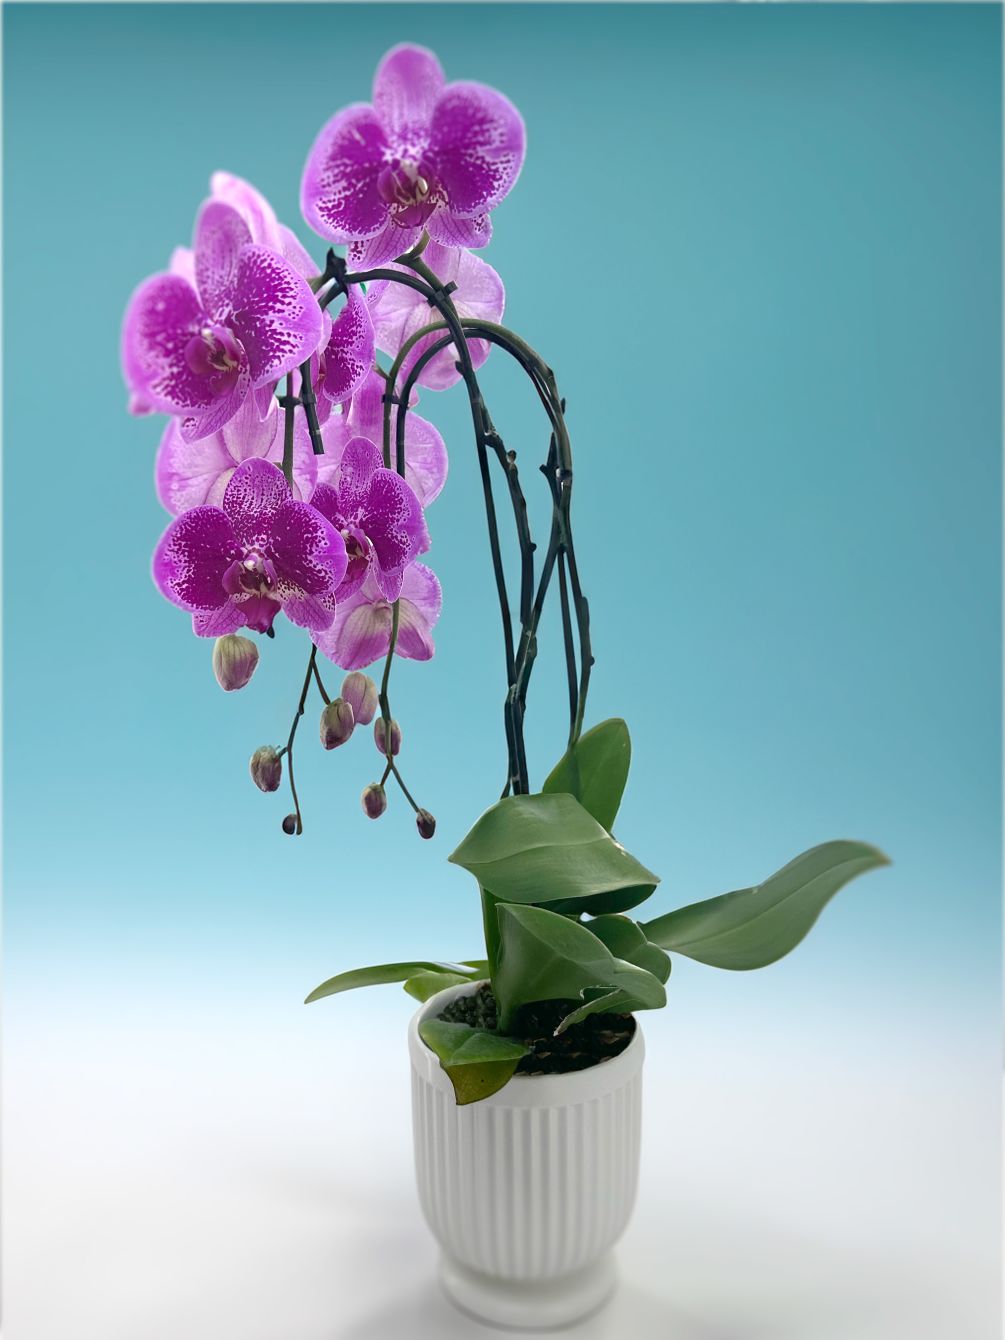 A pair of Phalaenopsis orchids in a ceramic planter.